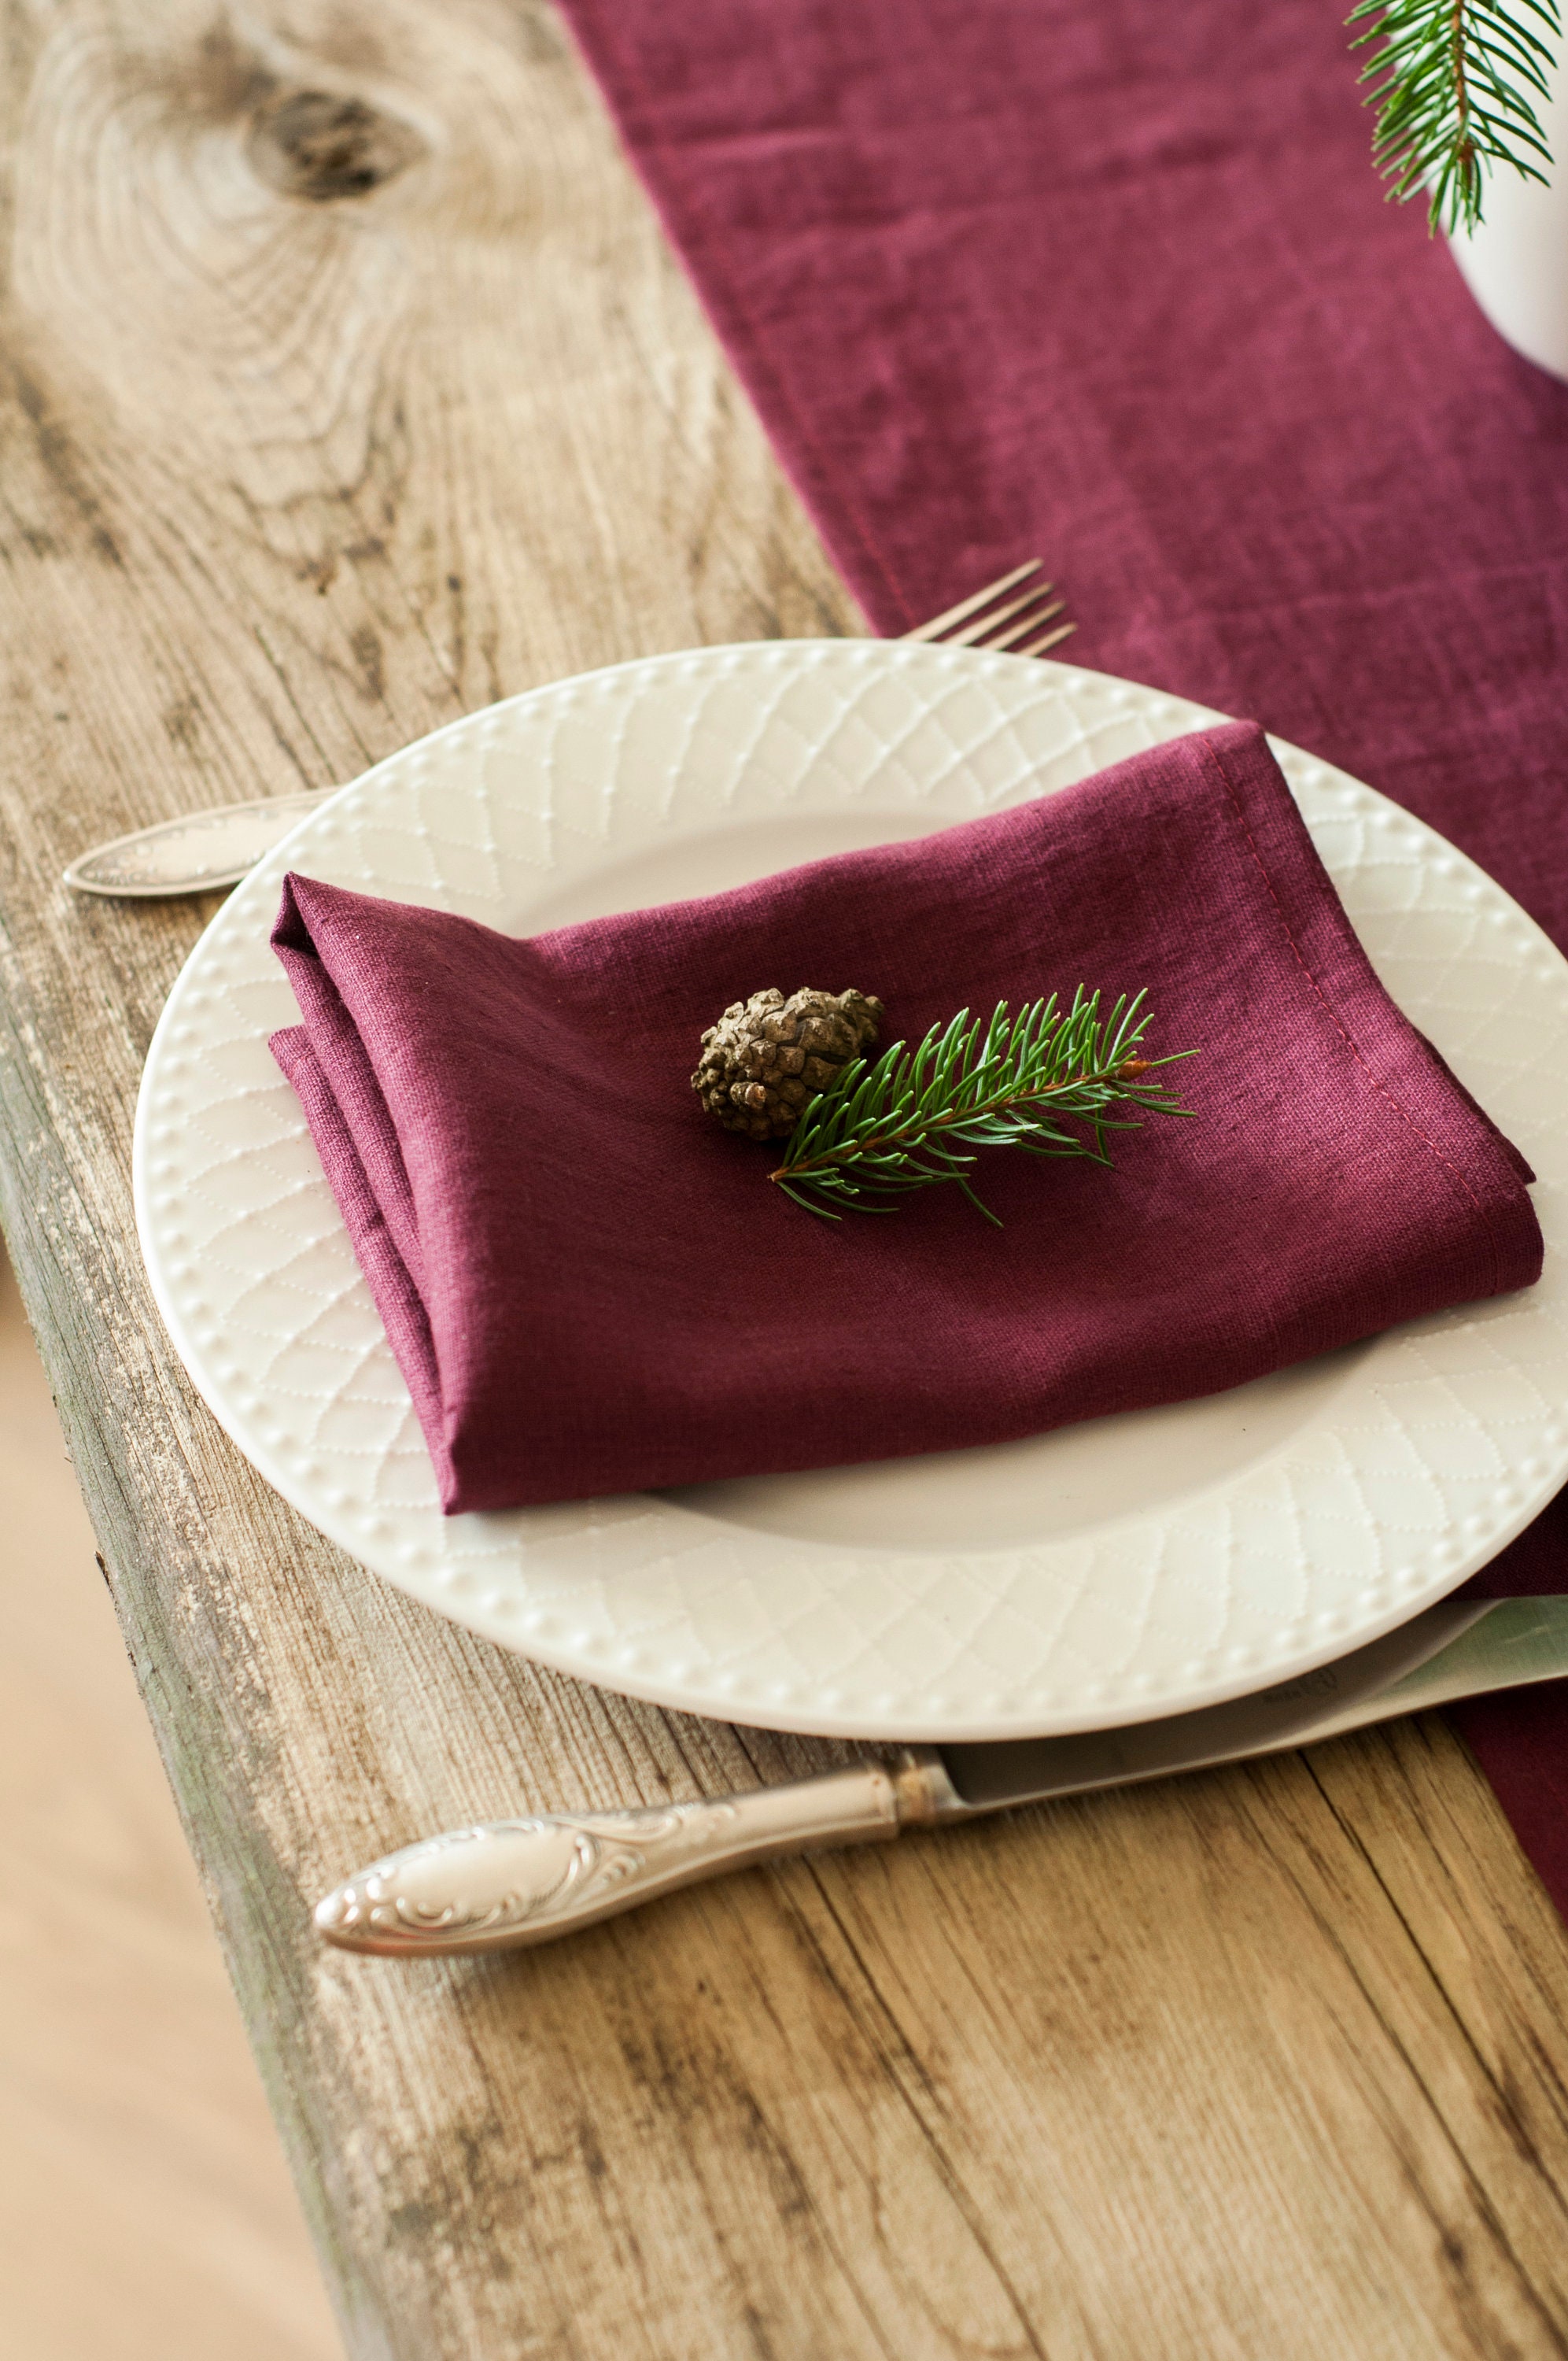 Handmade Cloth Napkins Delicate Cotton Linen Cloth Napkins with Fringe for  Dinners Parties Weddings 16 x 16 Inch Set of 12 Burgundy